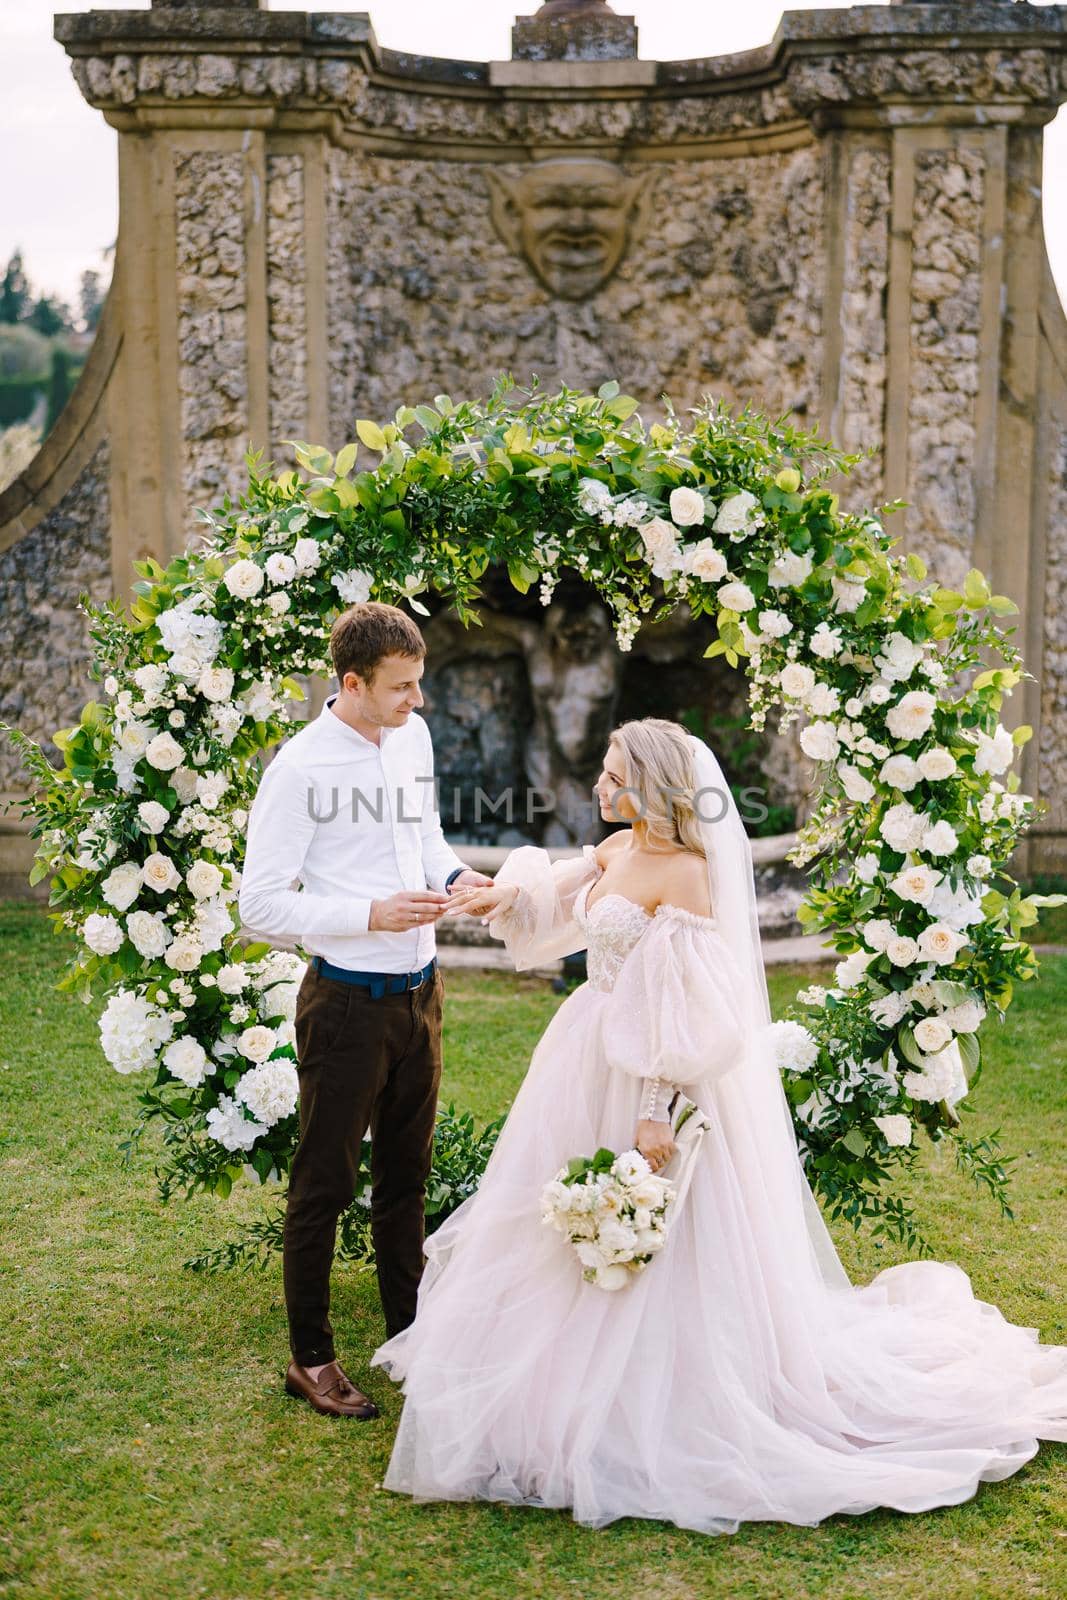 The groom puts the ring on the brides finger. Wedding at an old winery villa in Tuscany, Italy. Round wedding arch decorated with white flowers and greenery in front of an ancient Italian architecture by Nadtochiy